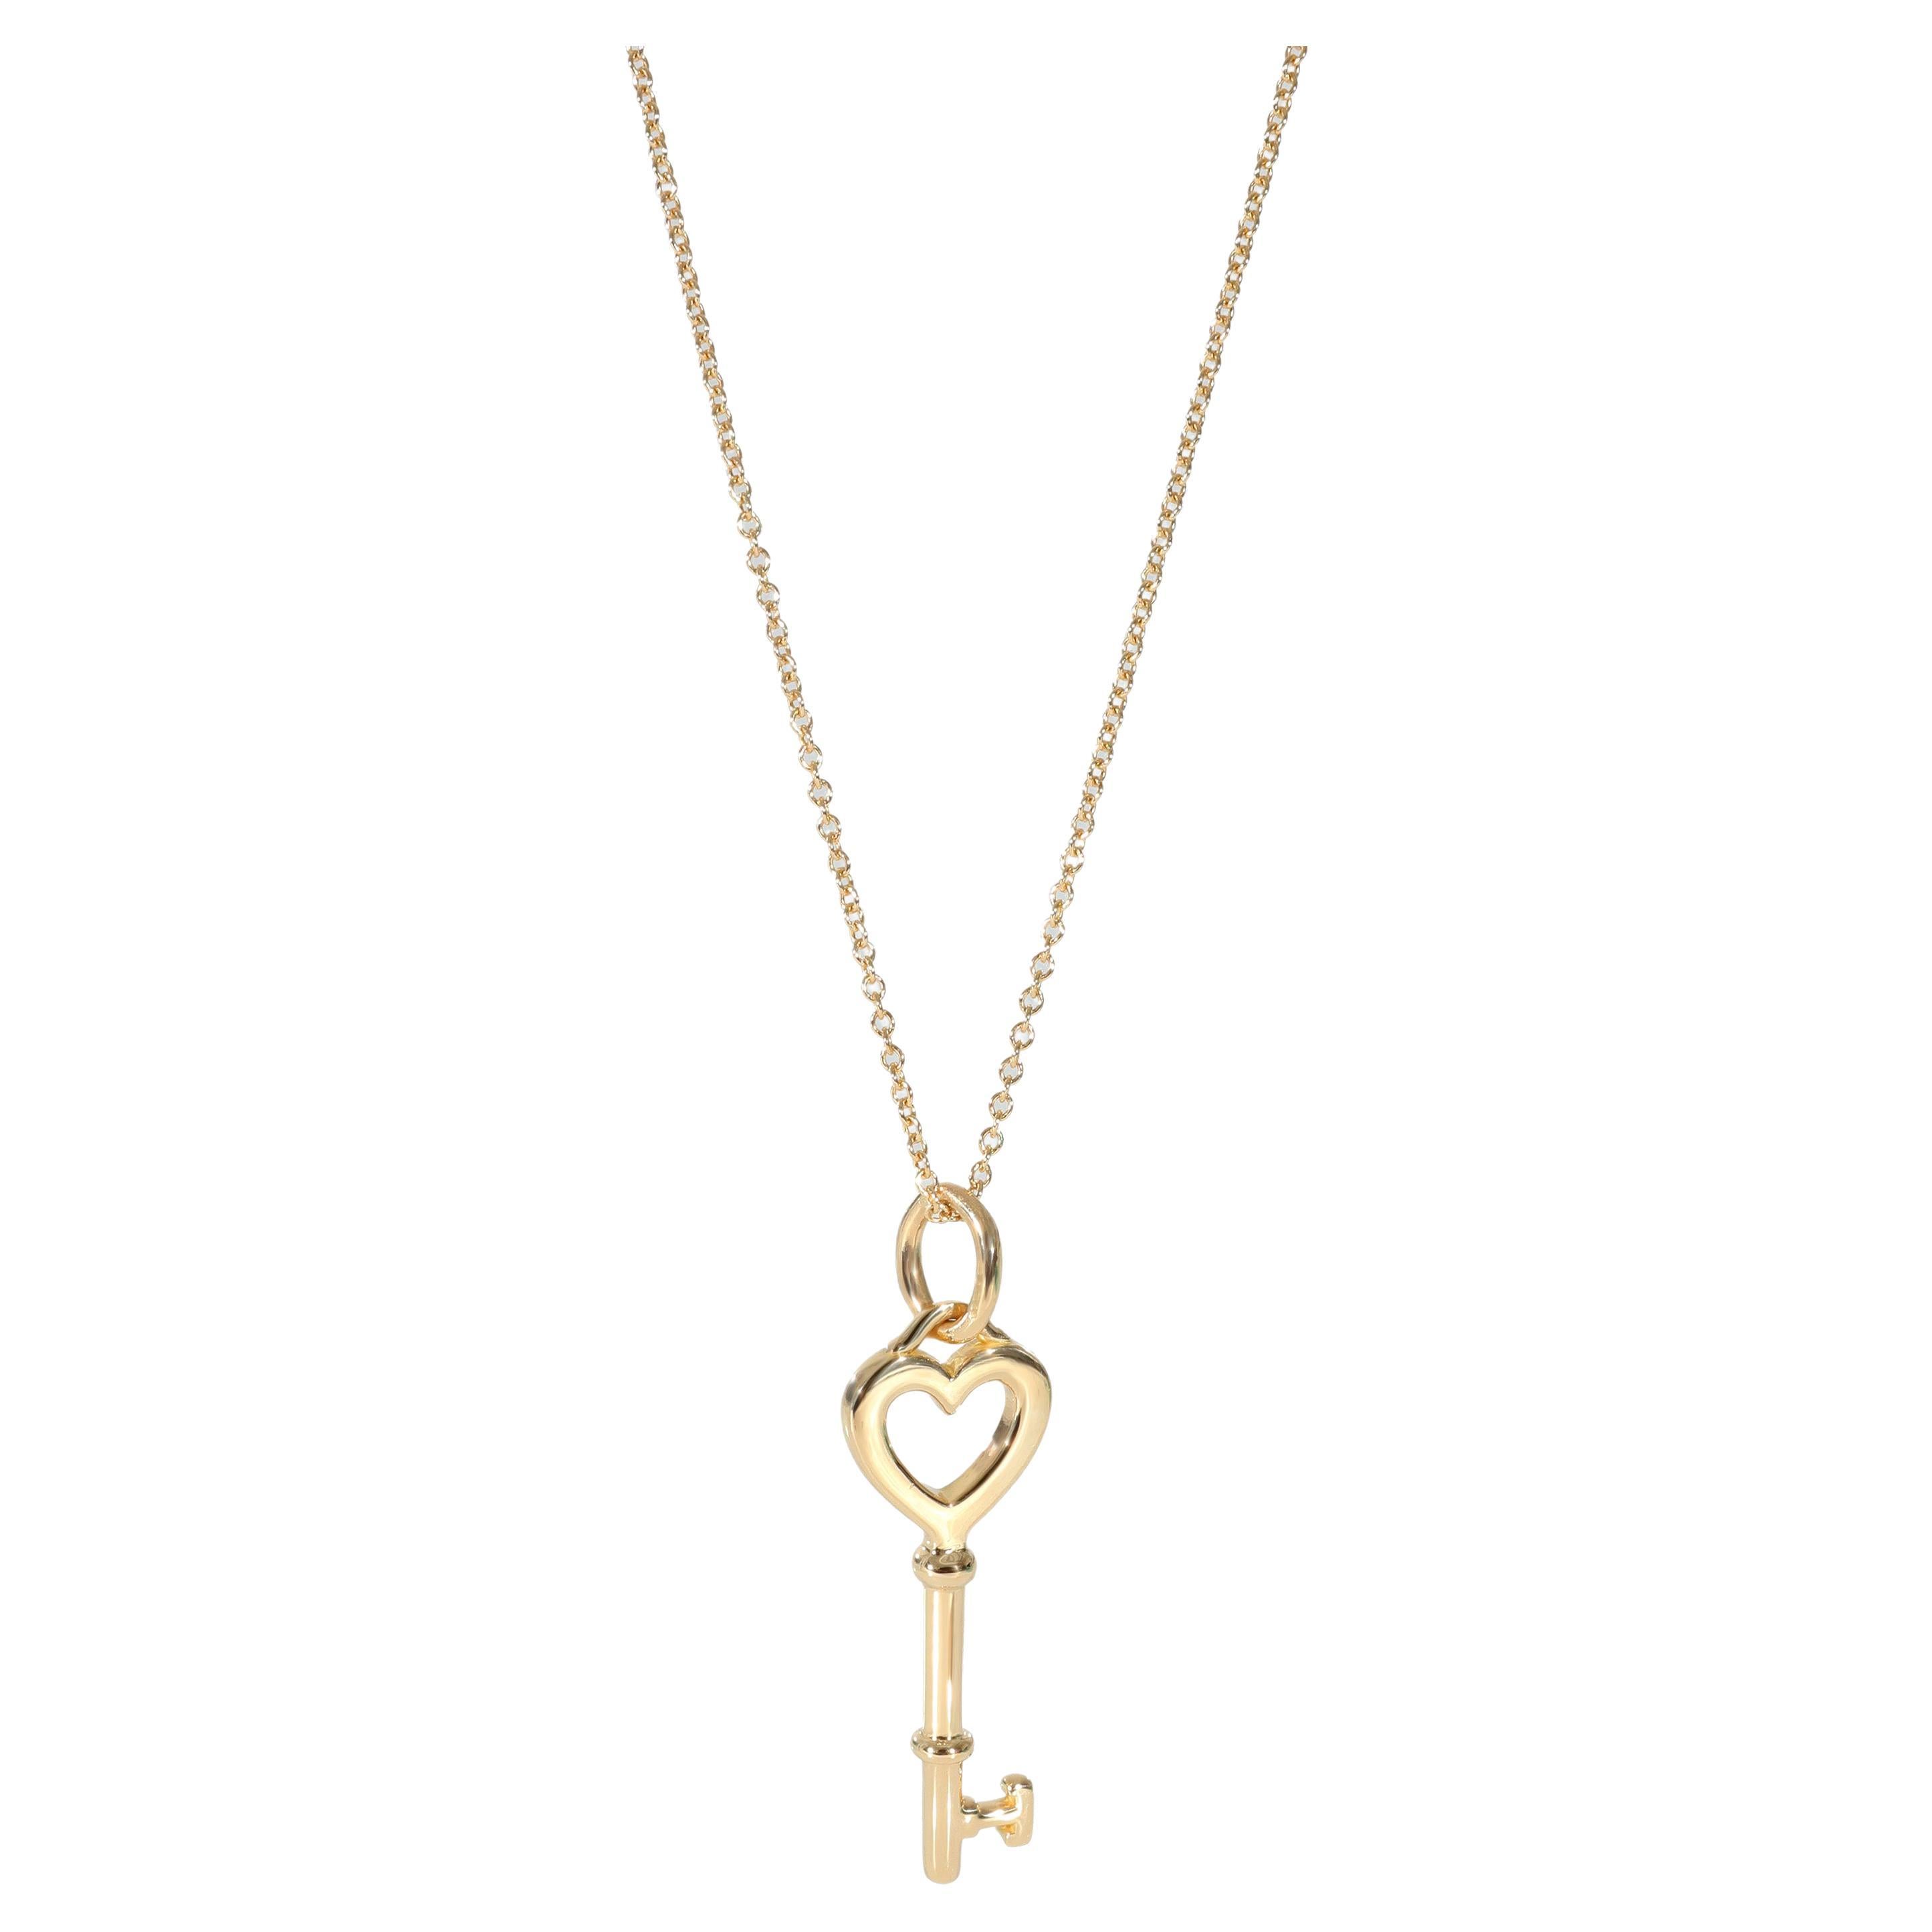 Tiffany & Co.Key Pendant on Chain in 18k Yellow Gold